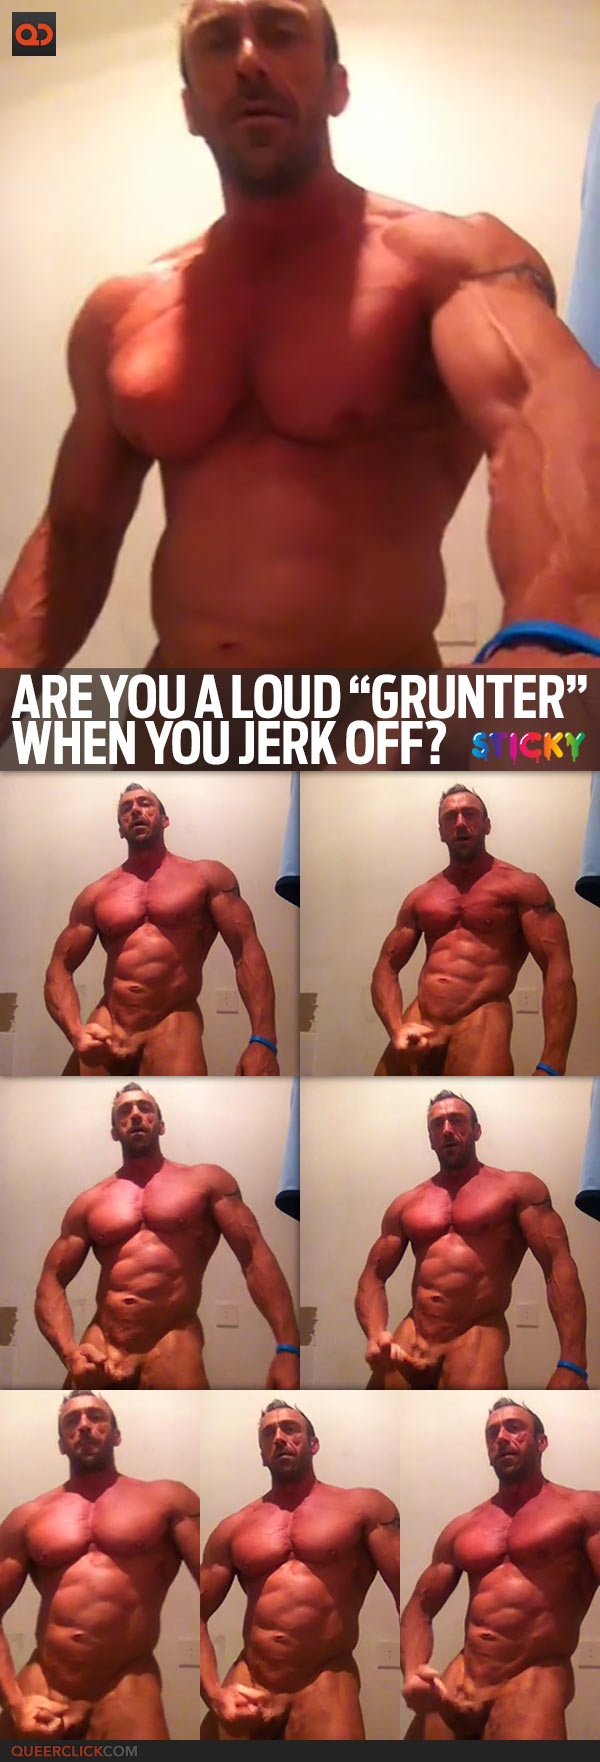 qc-sticky-grunt_and_wank-teaser